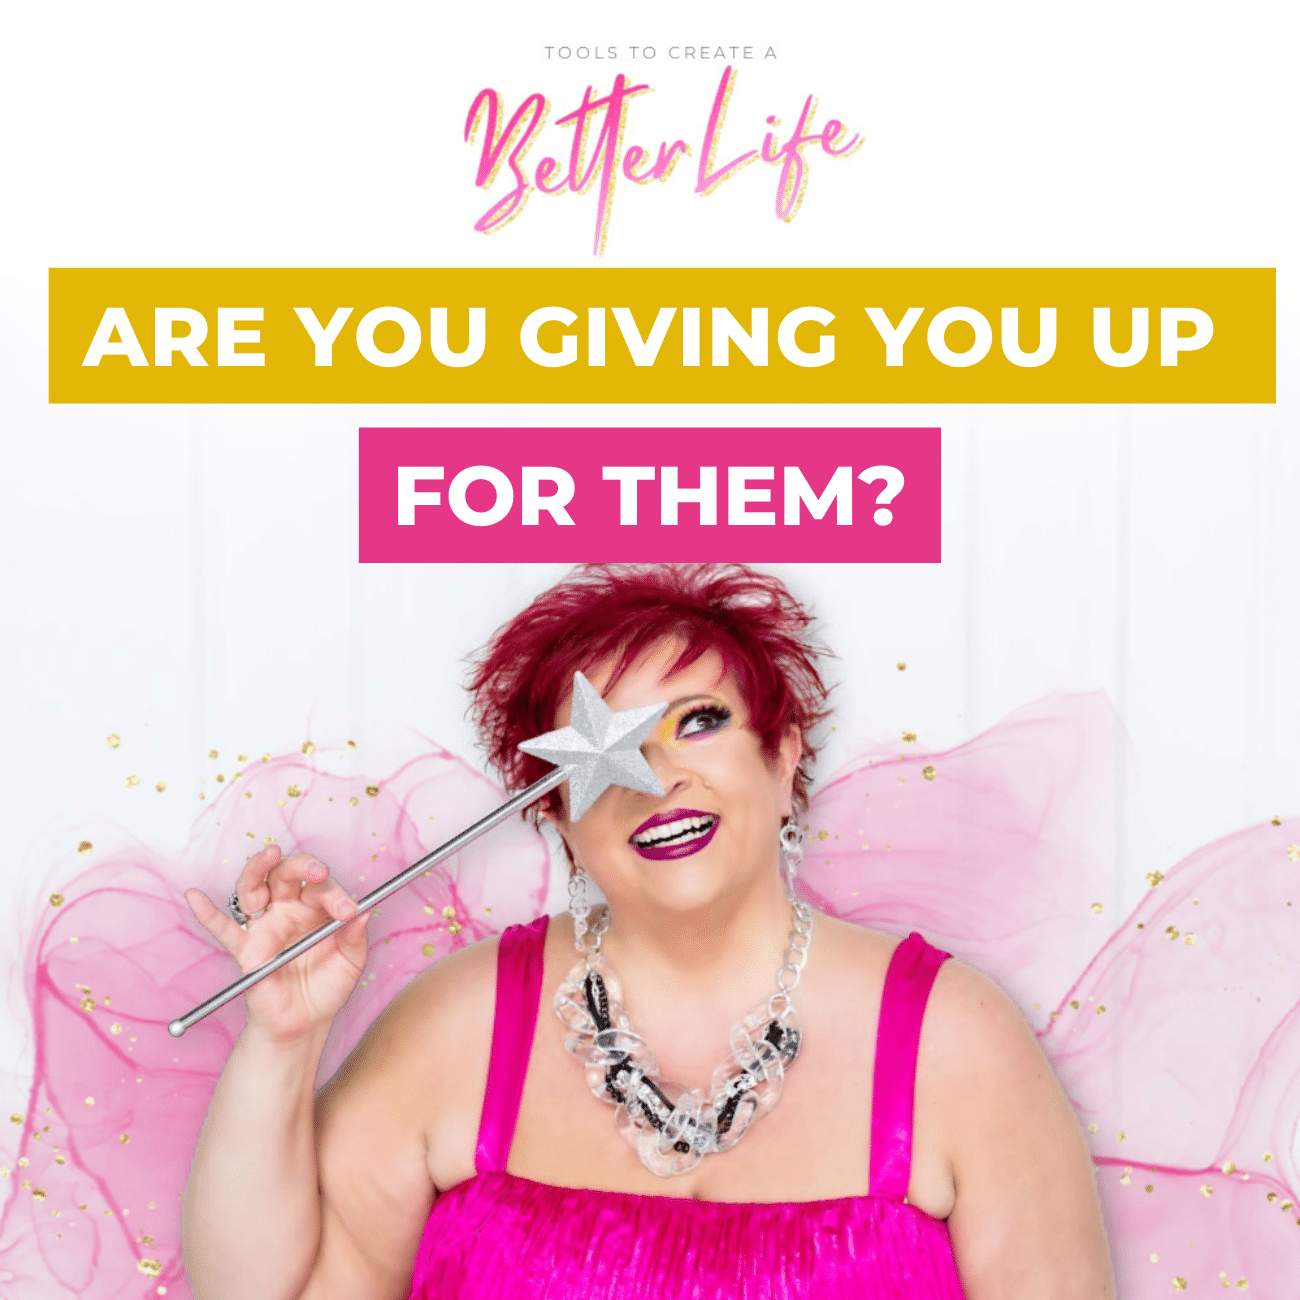 Are You Giving YOU Up for Them?